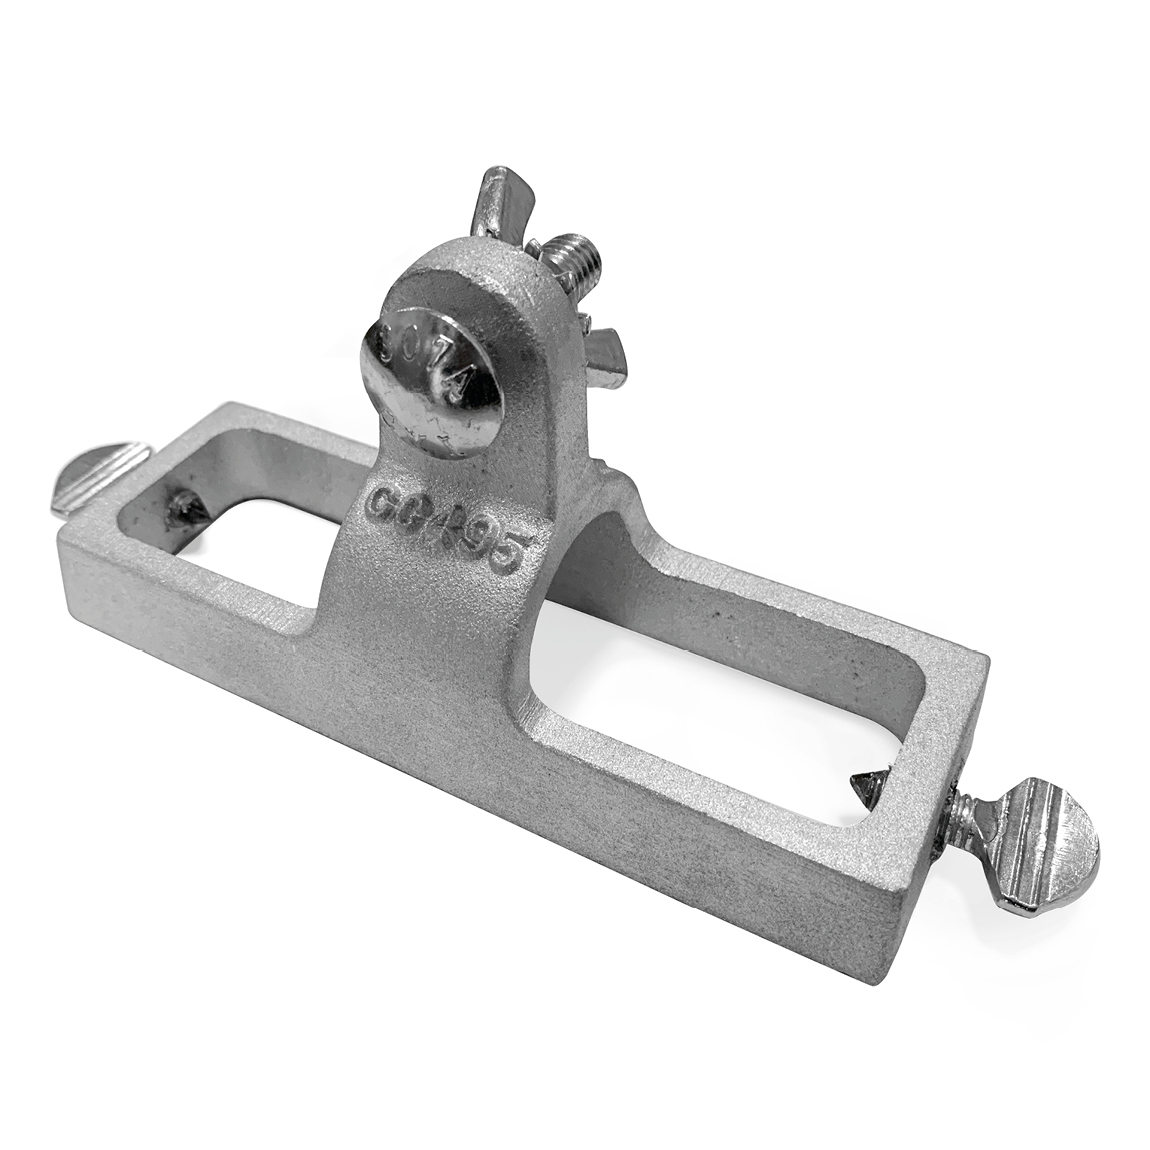 These brackets allow hand held groovers to be attached to long poles for large concrete slab reach. This float convertor bracket tightly holds your hand groover into a fixed position for accuracy at length. Available via Speedcrete, United Kingdom.